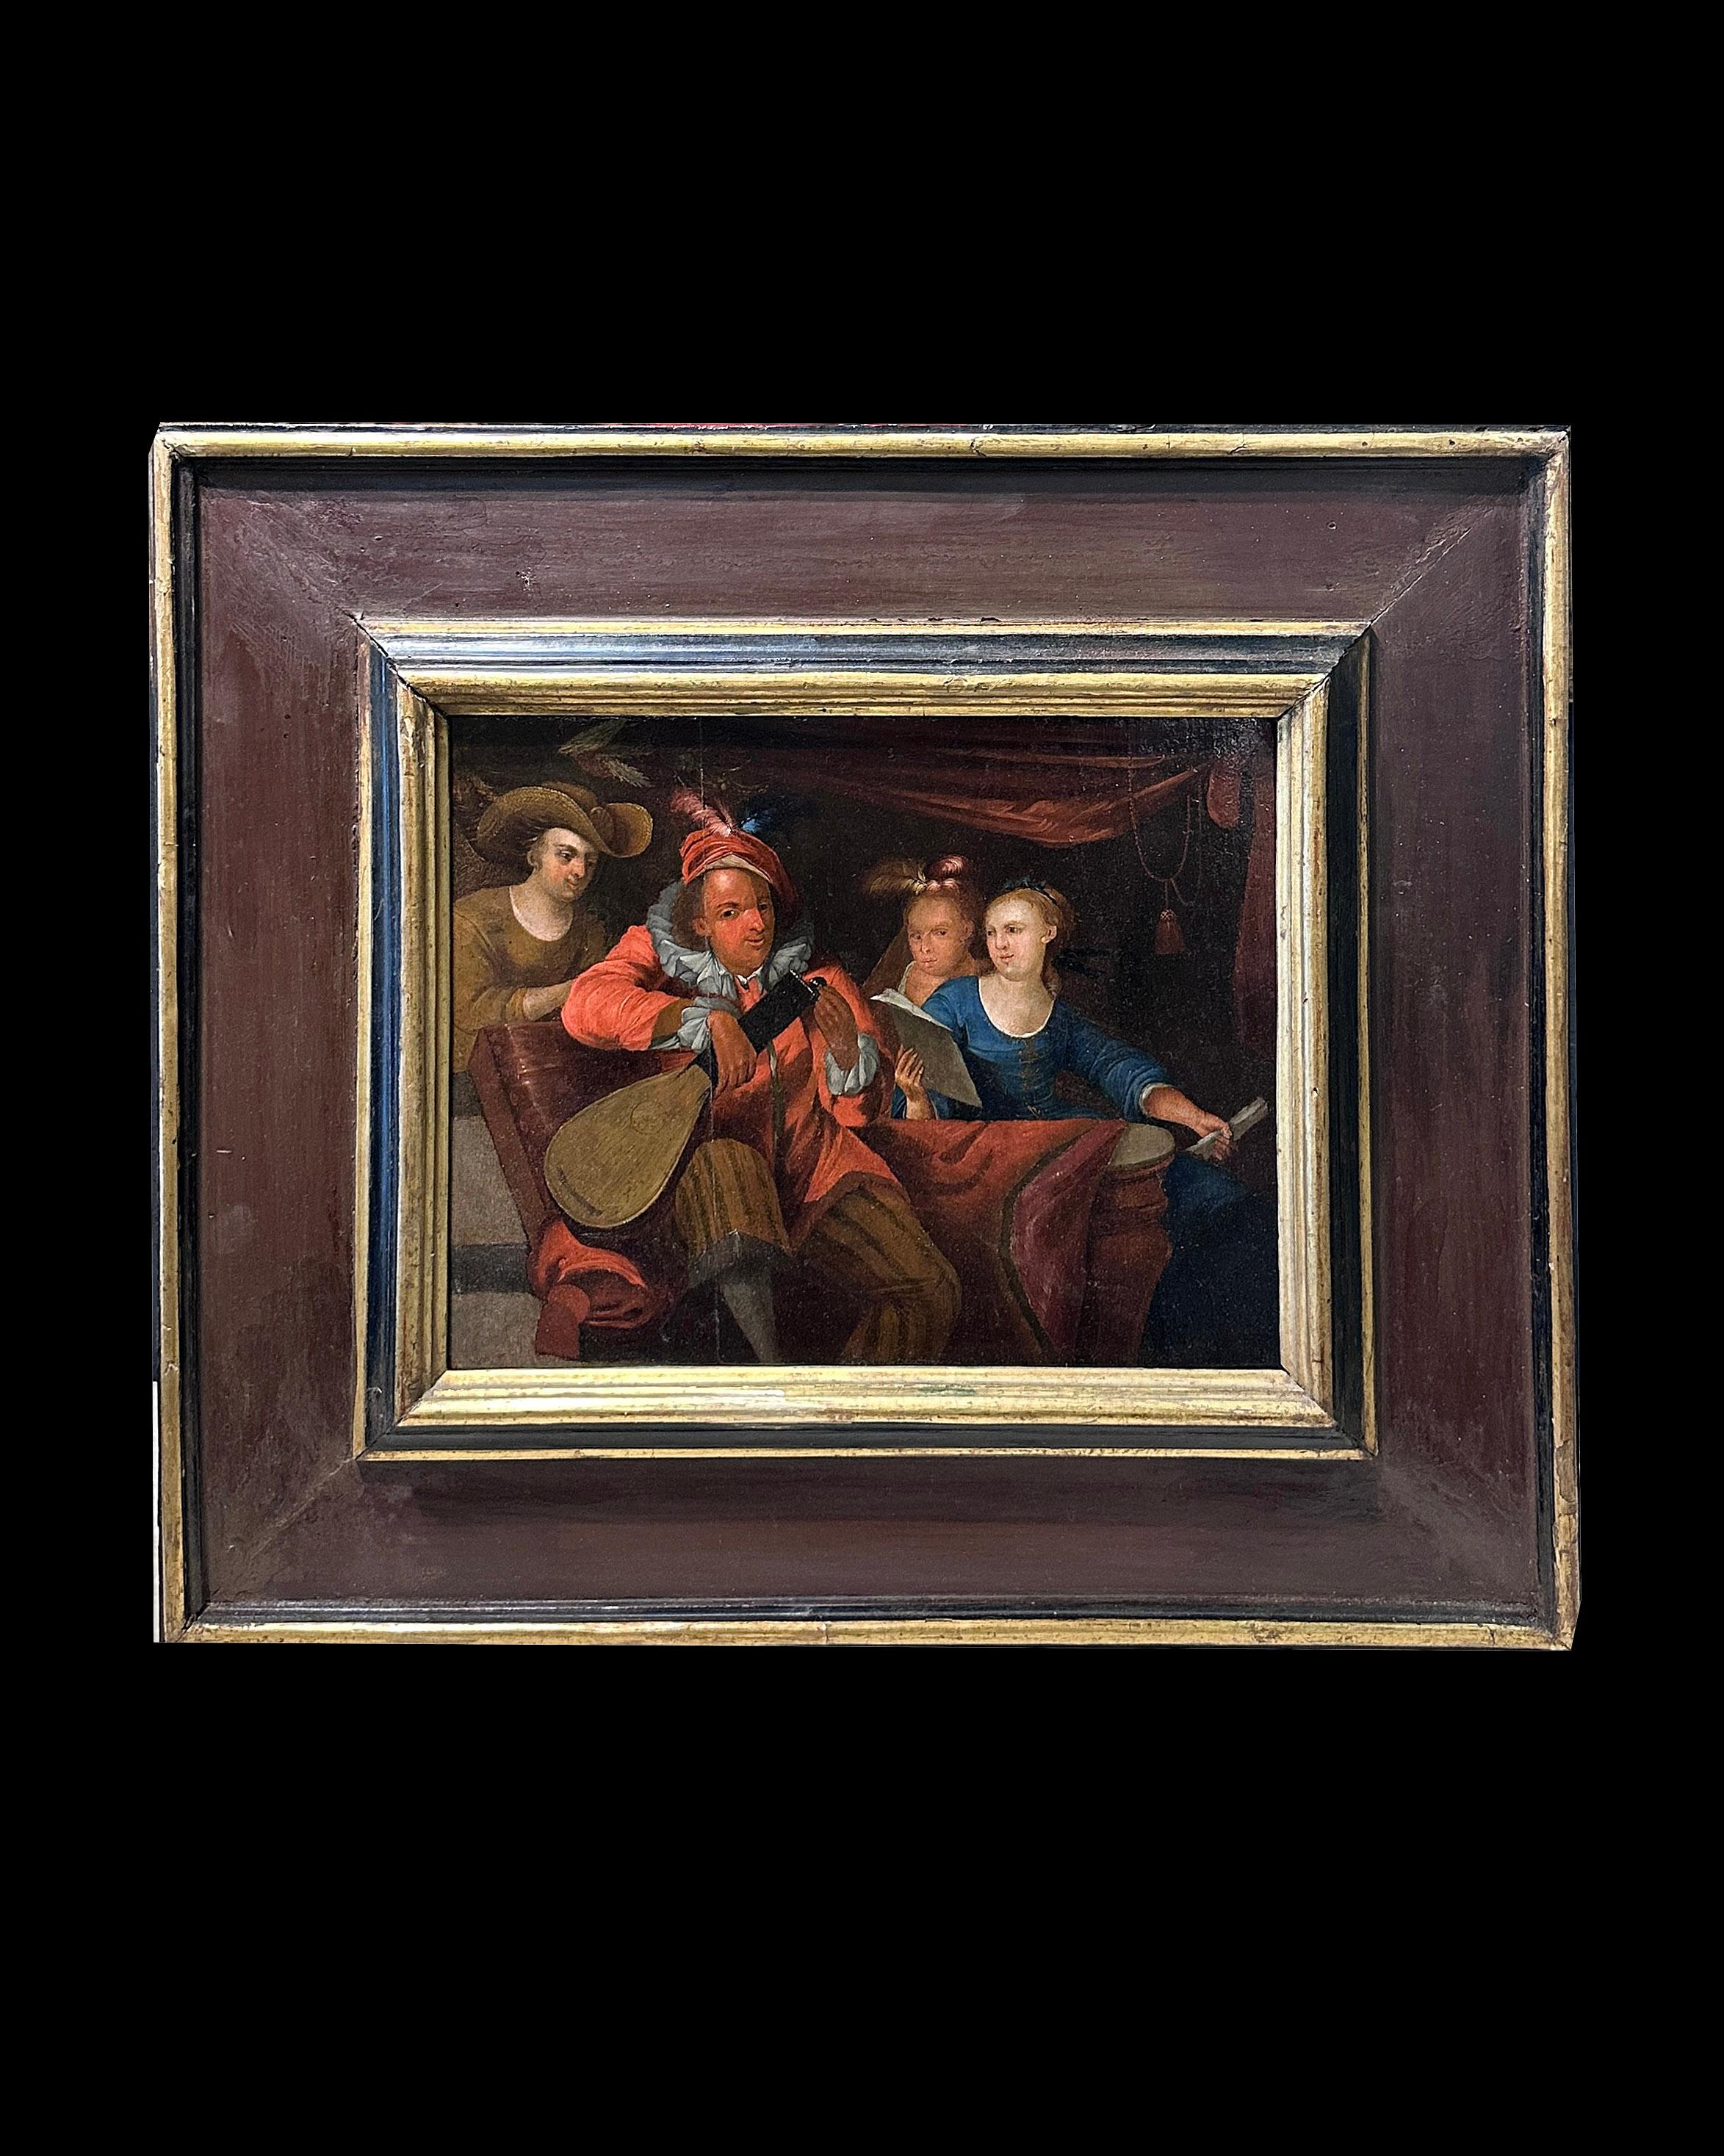 This fascinating painting, made with oil tempera on walnut tablet and framed in a thick frame, represents a lively scene of celebration and concert in the palace. At the center of the work, a man in an exotic hat plays the archlute while the other